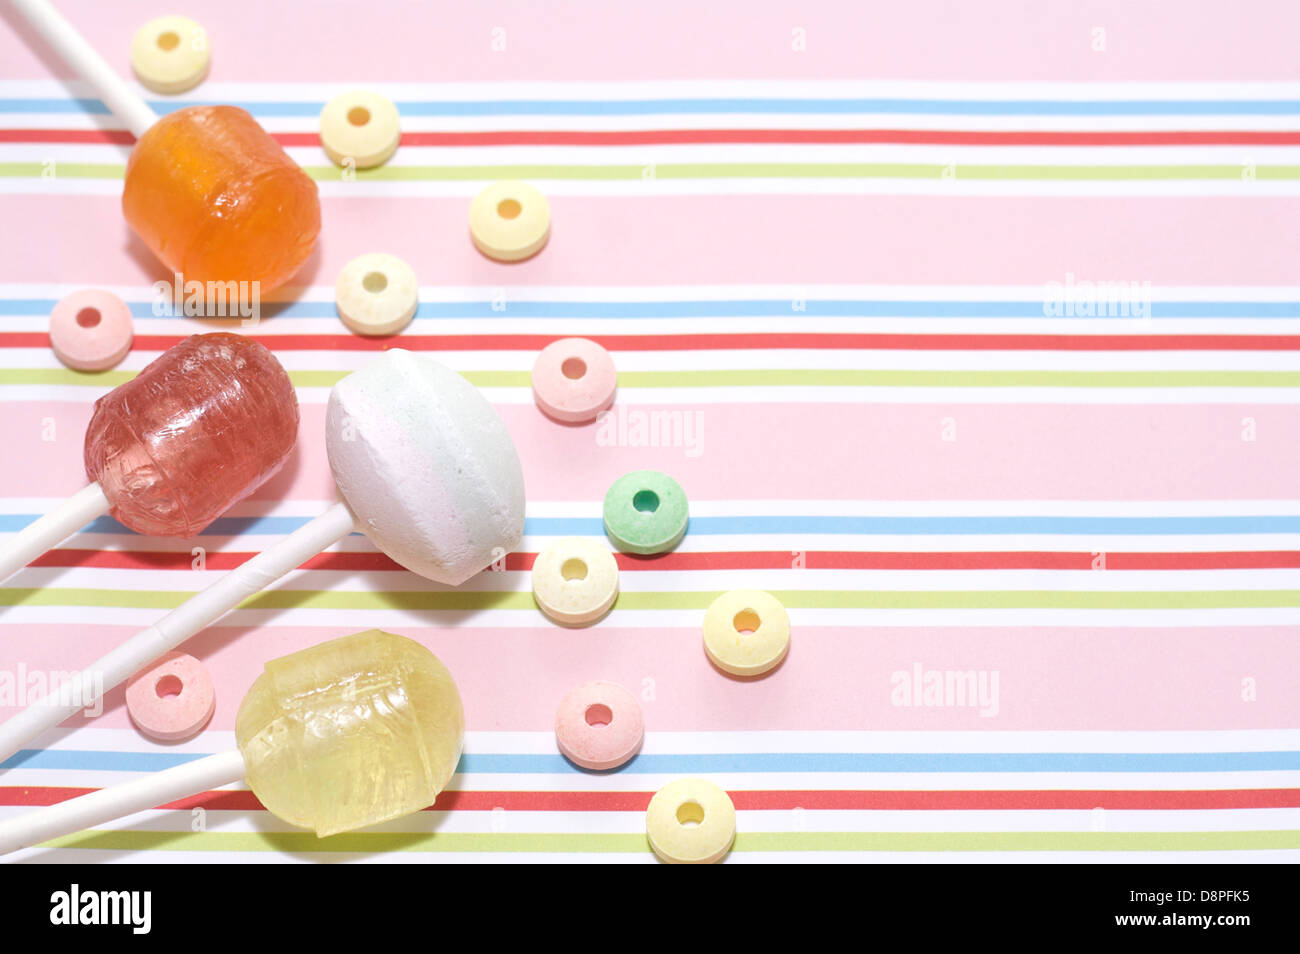 Lollies and sweets on striped background  2 Stock Photo